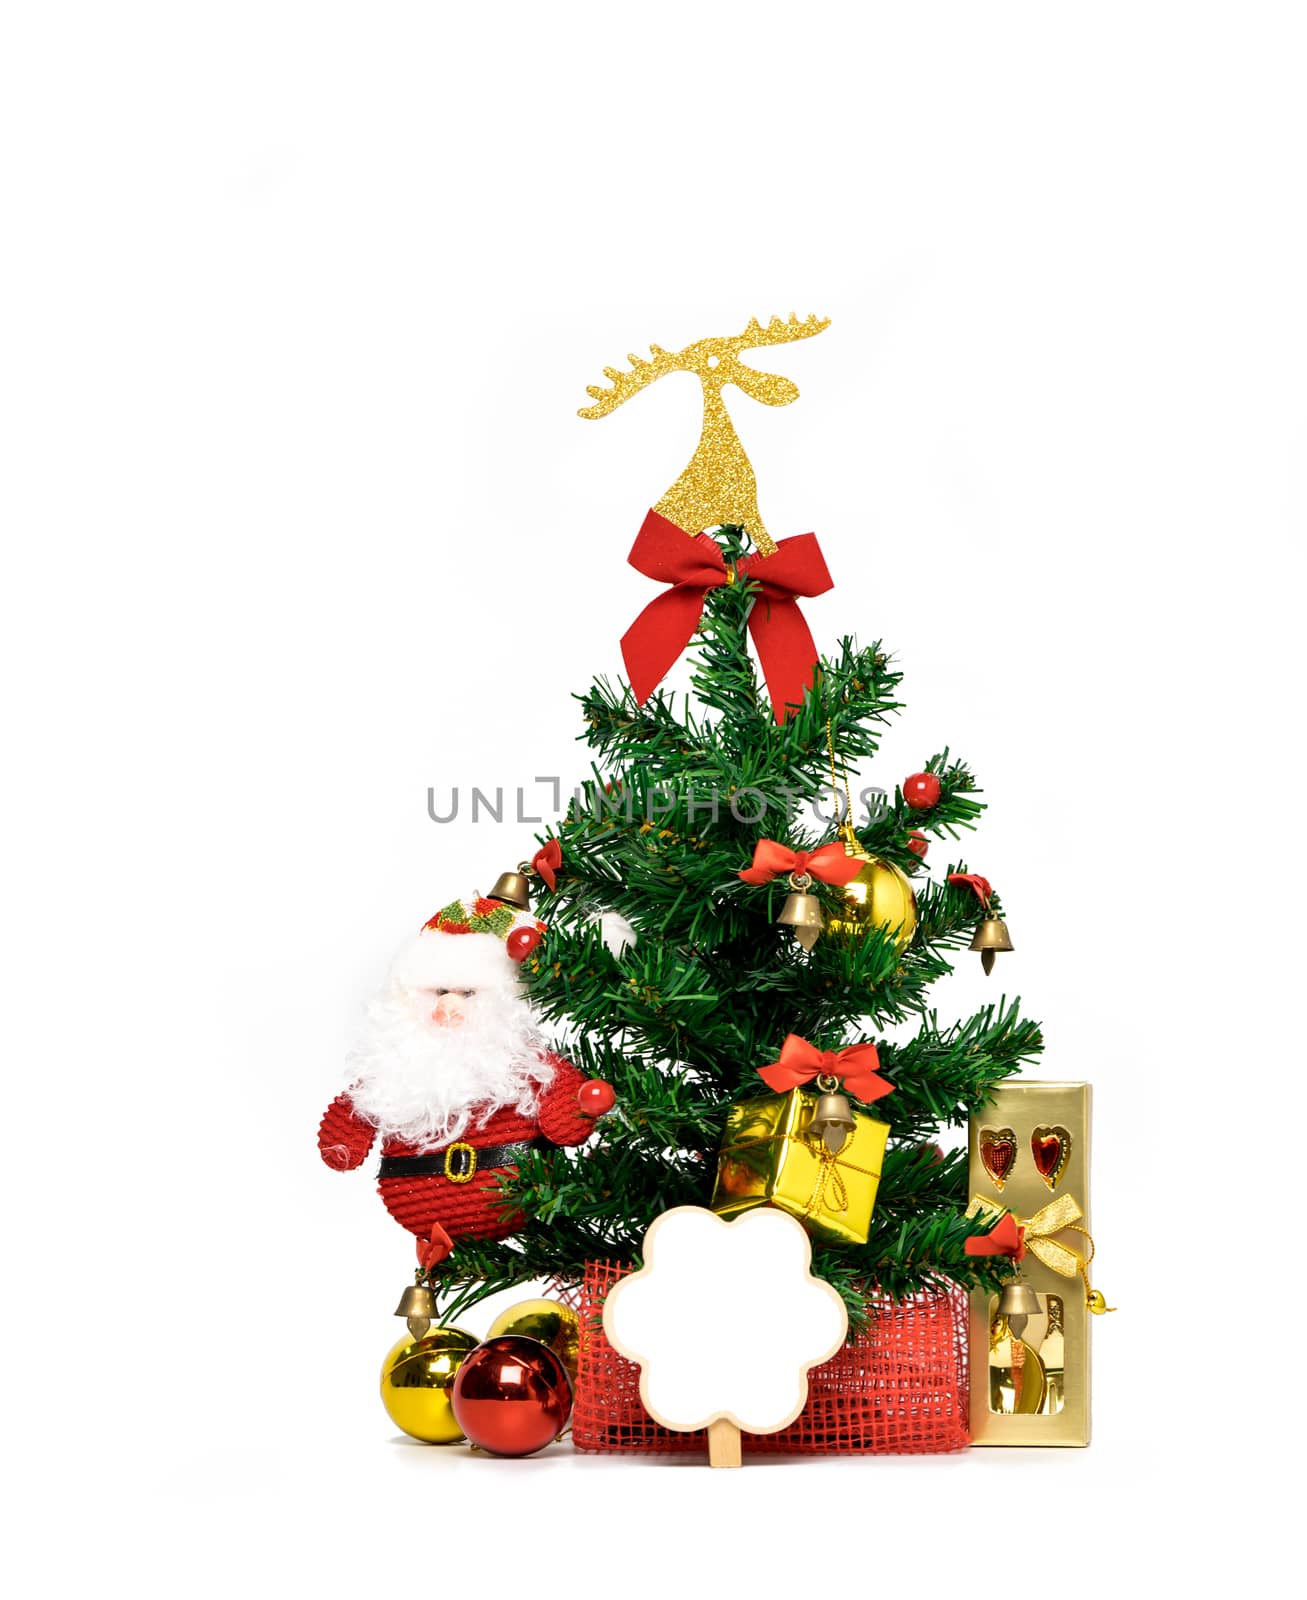 Christmas tree decorated with ribbon, card, fork and spoon in golden gift box, Santa Claus and ball on white background with copy space, just add your own text